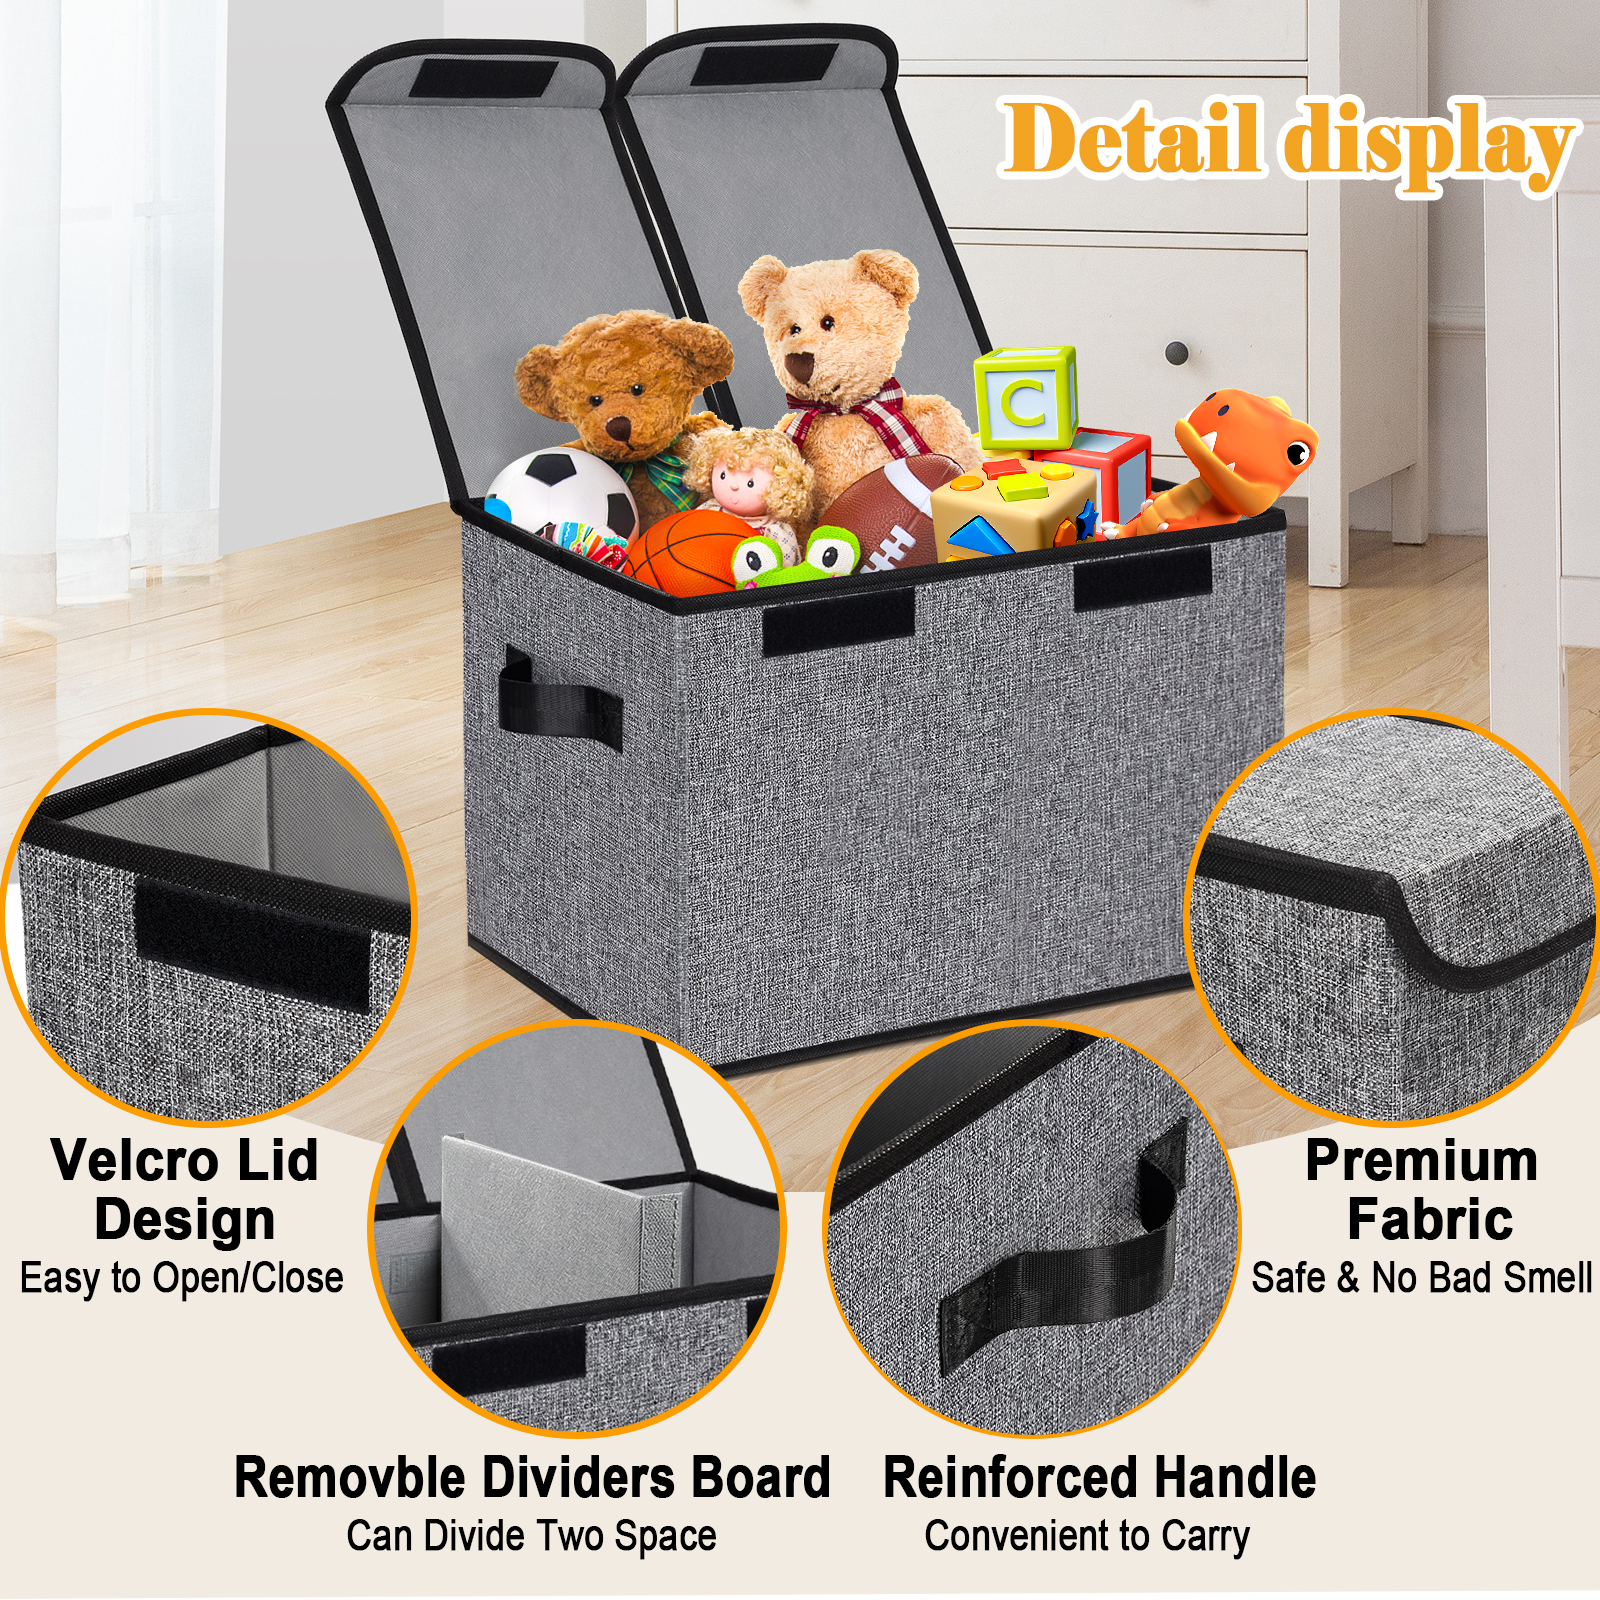 TEAYINGDE 91L Large Toy Box Chest Storage Organizer with Lid, Collapsible Kids Toys Boxes Basket Bins with Sturdy Handles for Boys and Girls, Nursery, Playroom (Gray) - image 5 of 8